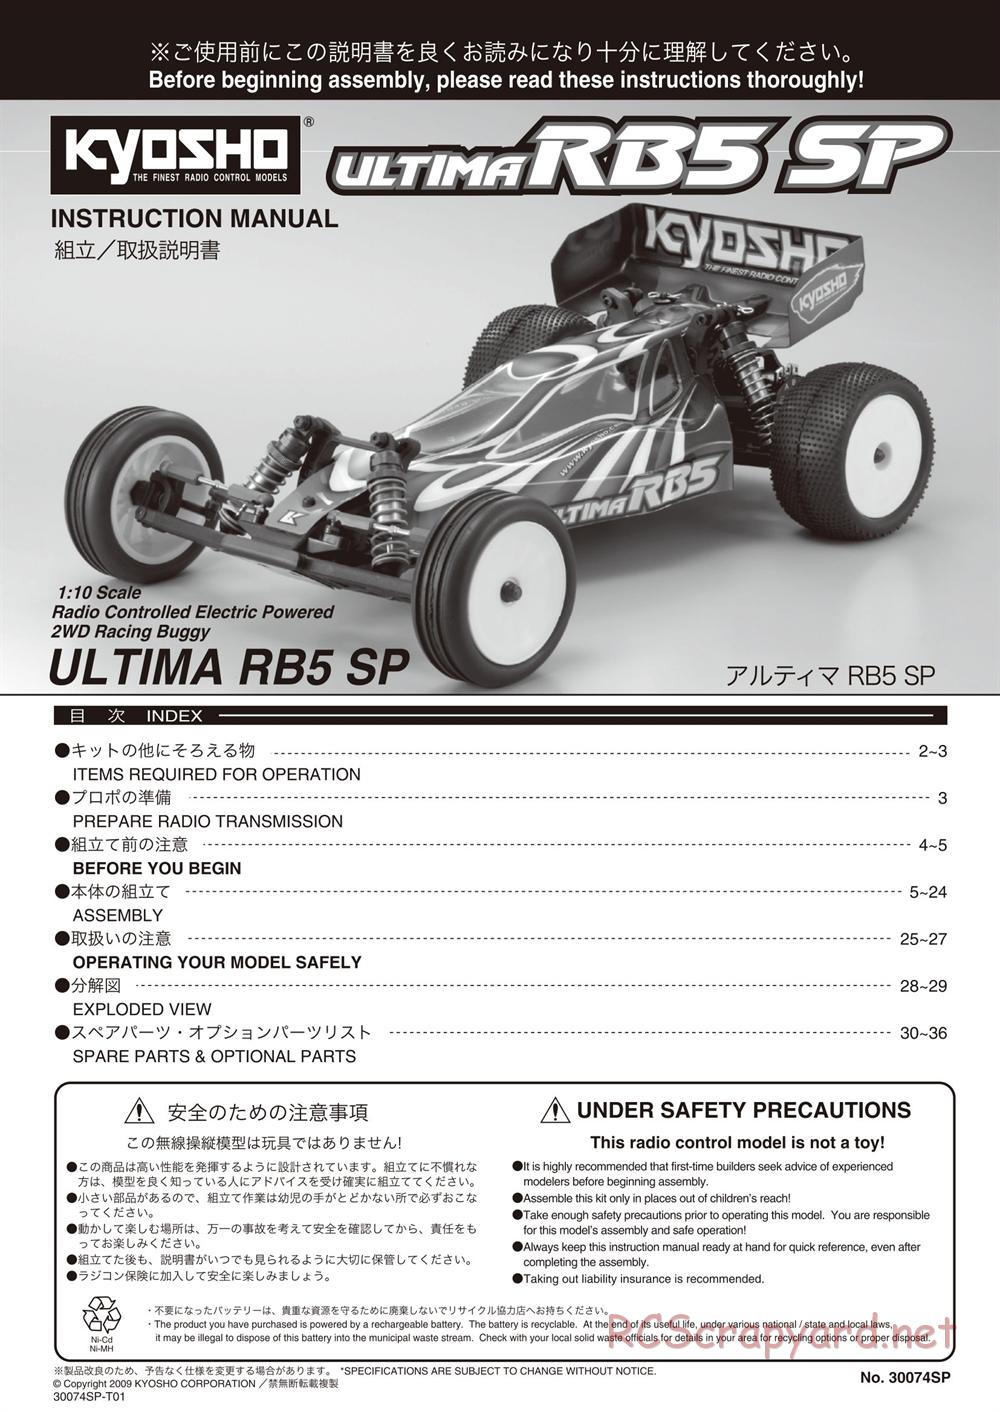 Kyosho - Ultima RB5 SP - Manual - Page 1